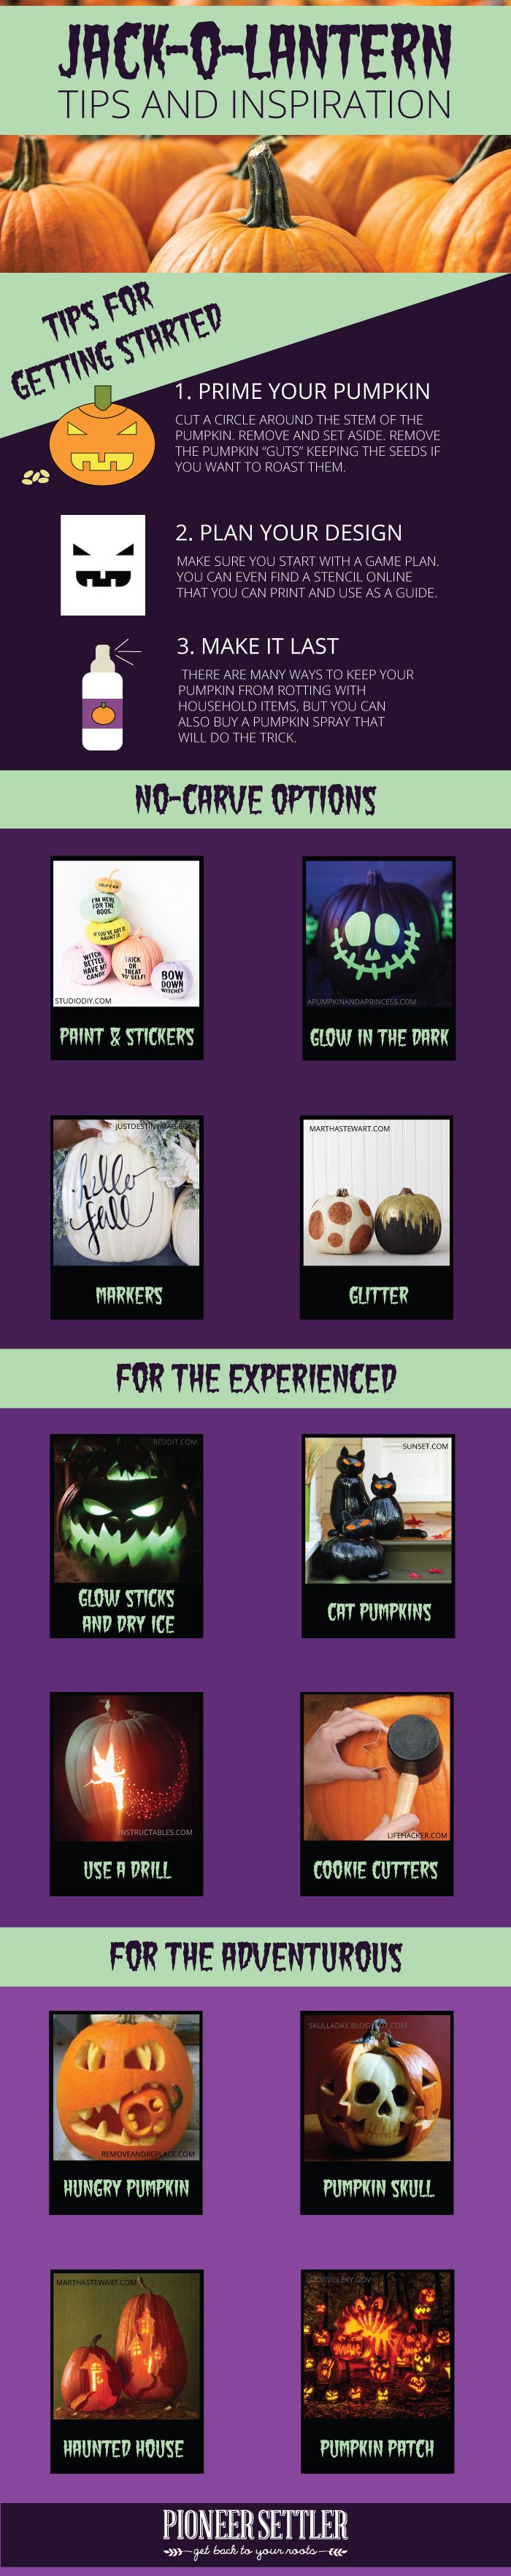 Jack-o-Lantern Tips and Inspiration | How To Carve The Perfect Jack-O-Lantern [Infographic]